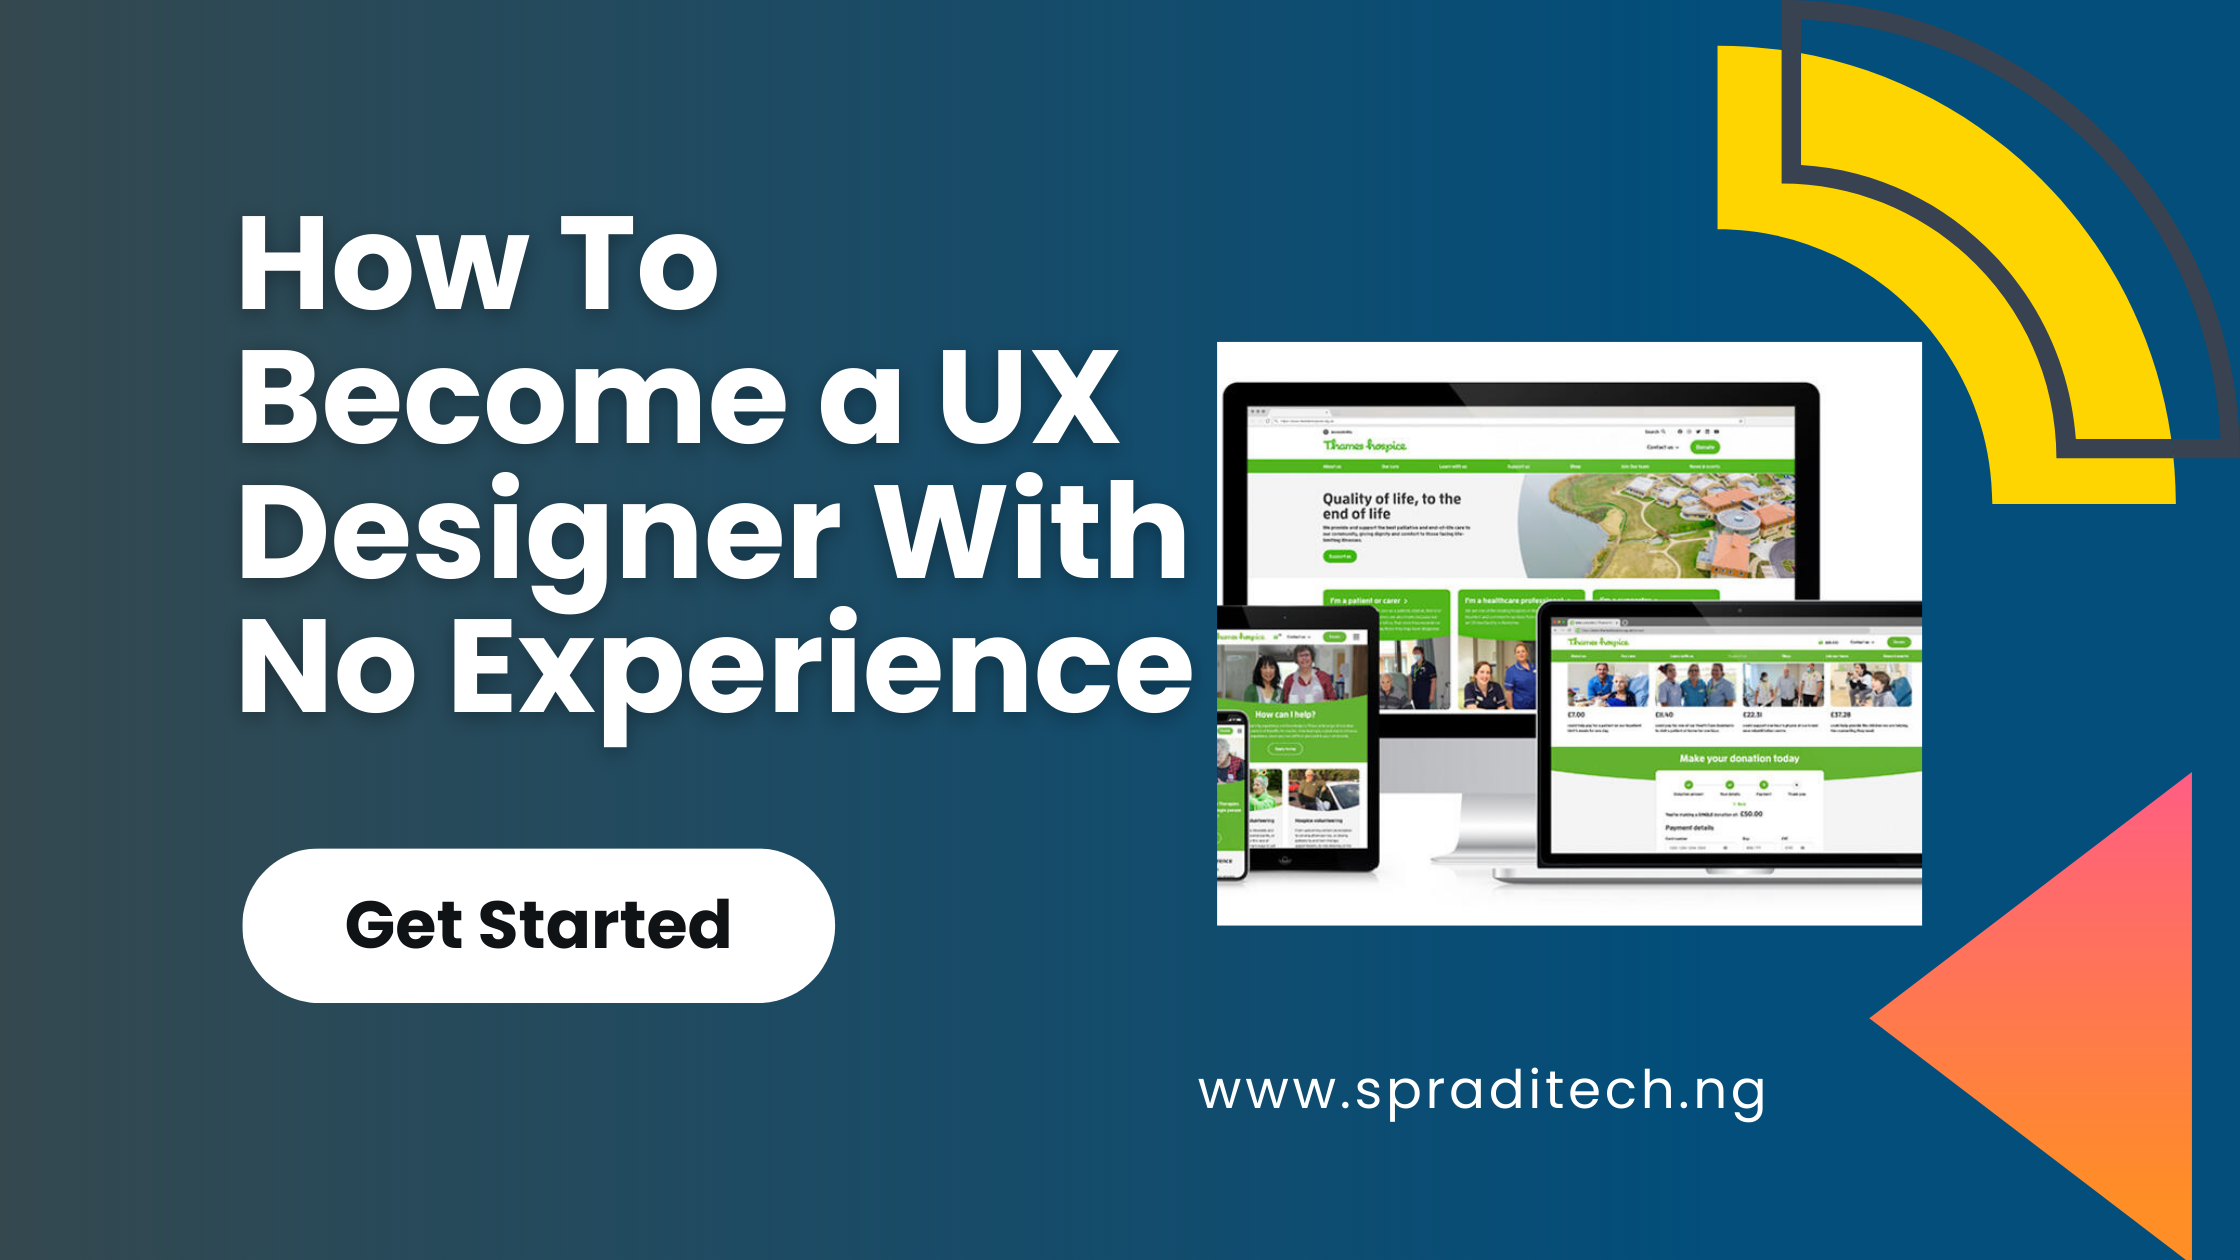 How To Become a UX Designer With No Experience